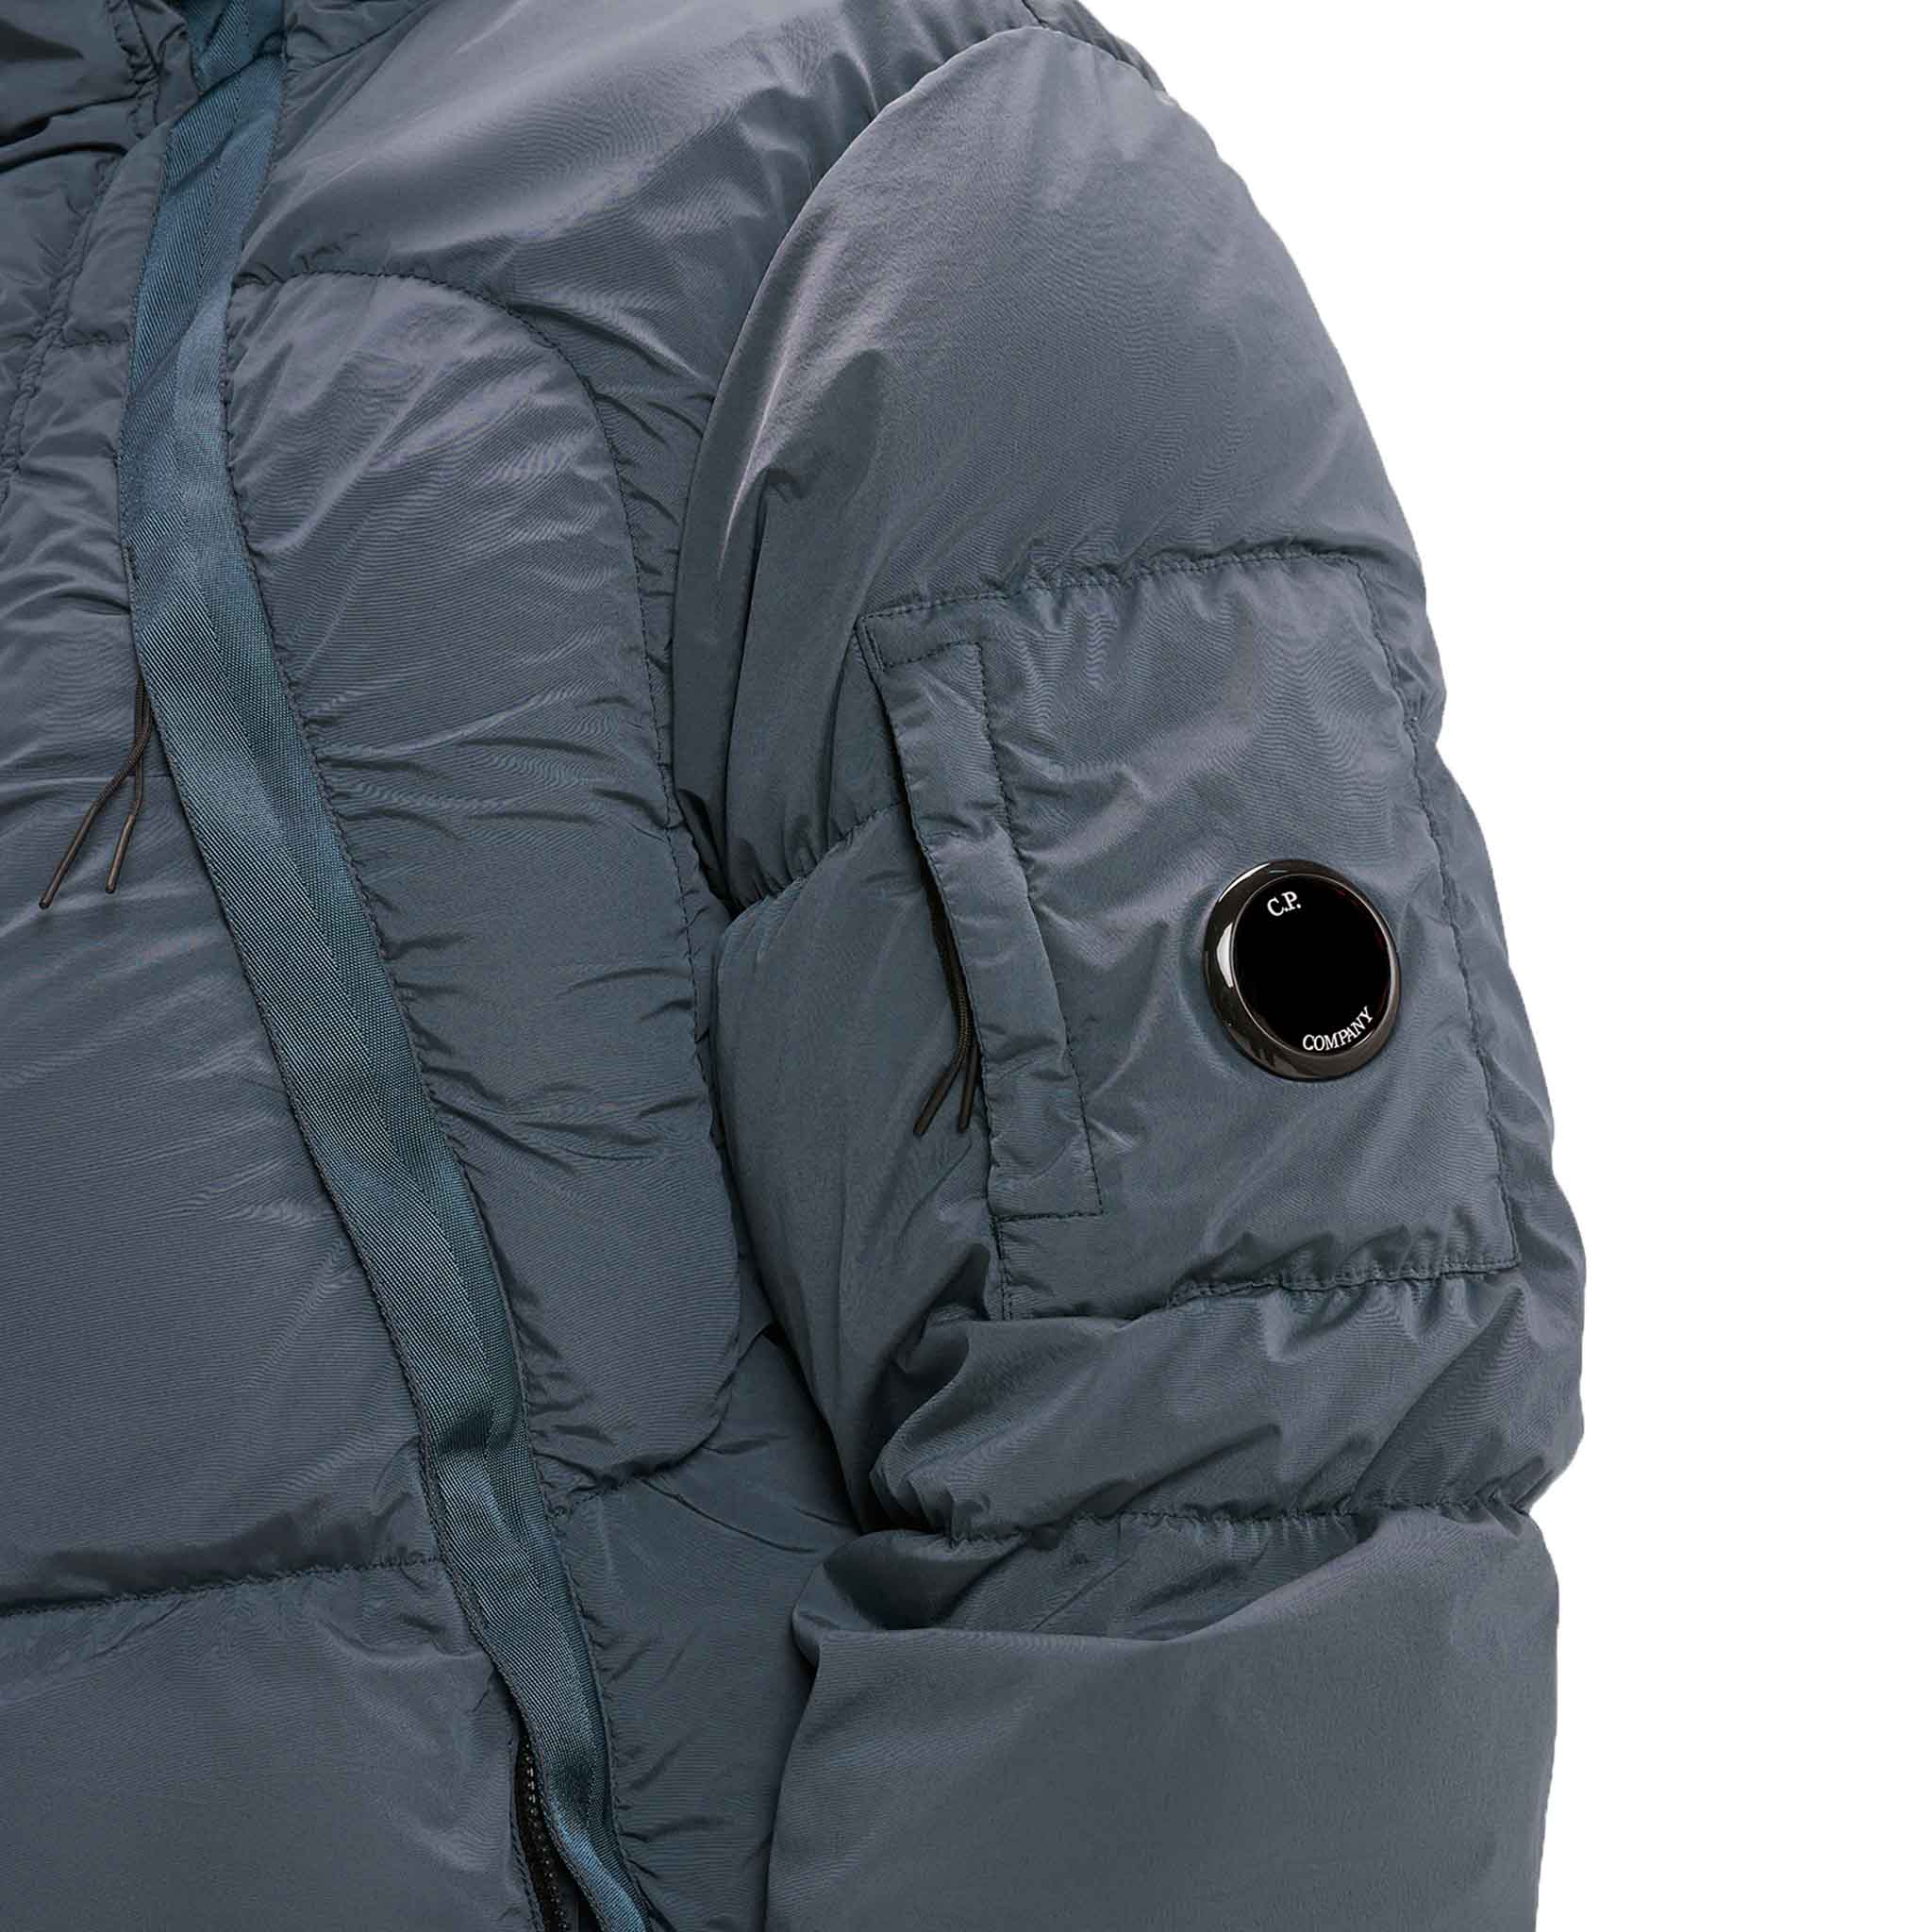 C.P. Company Nycra-R Hooded Down Jacket in Orion Blue